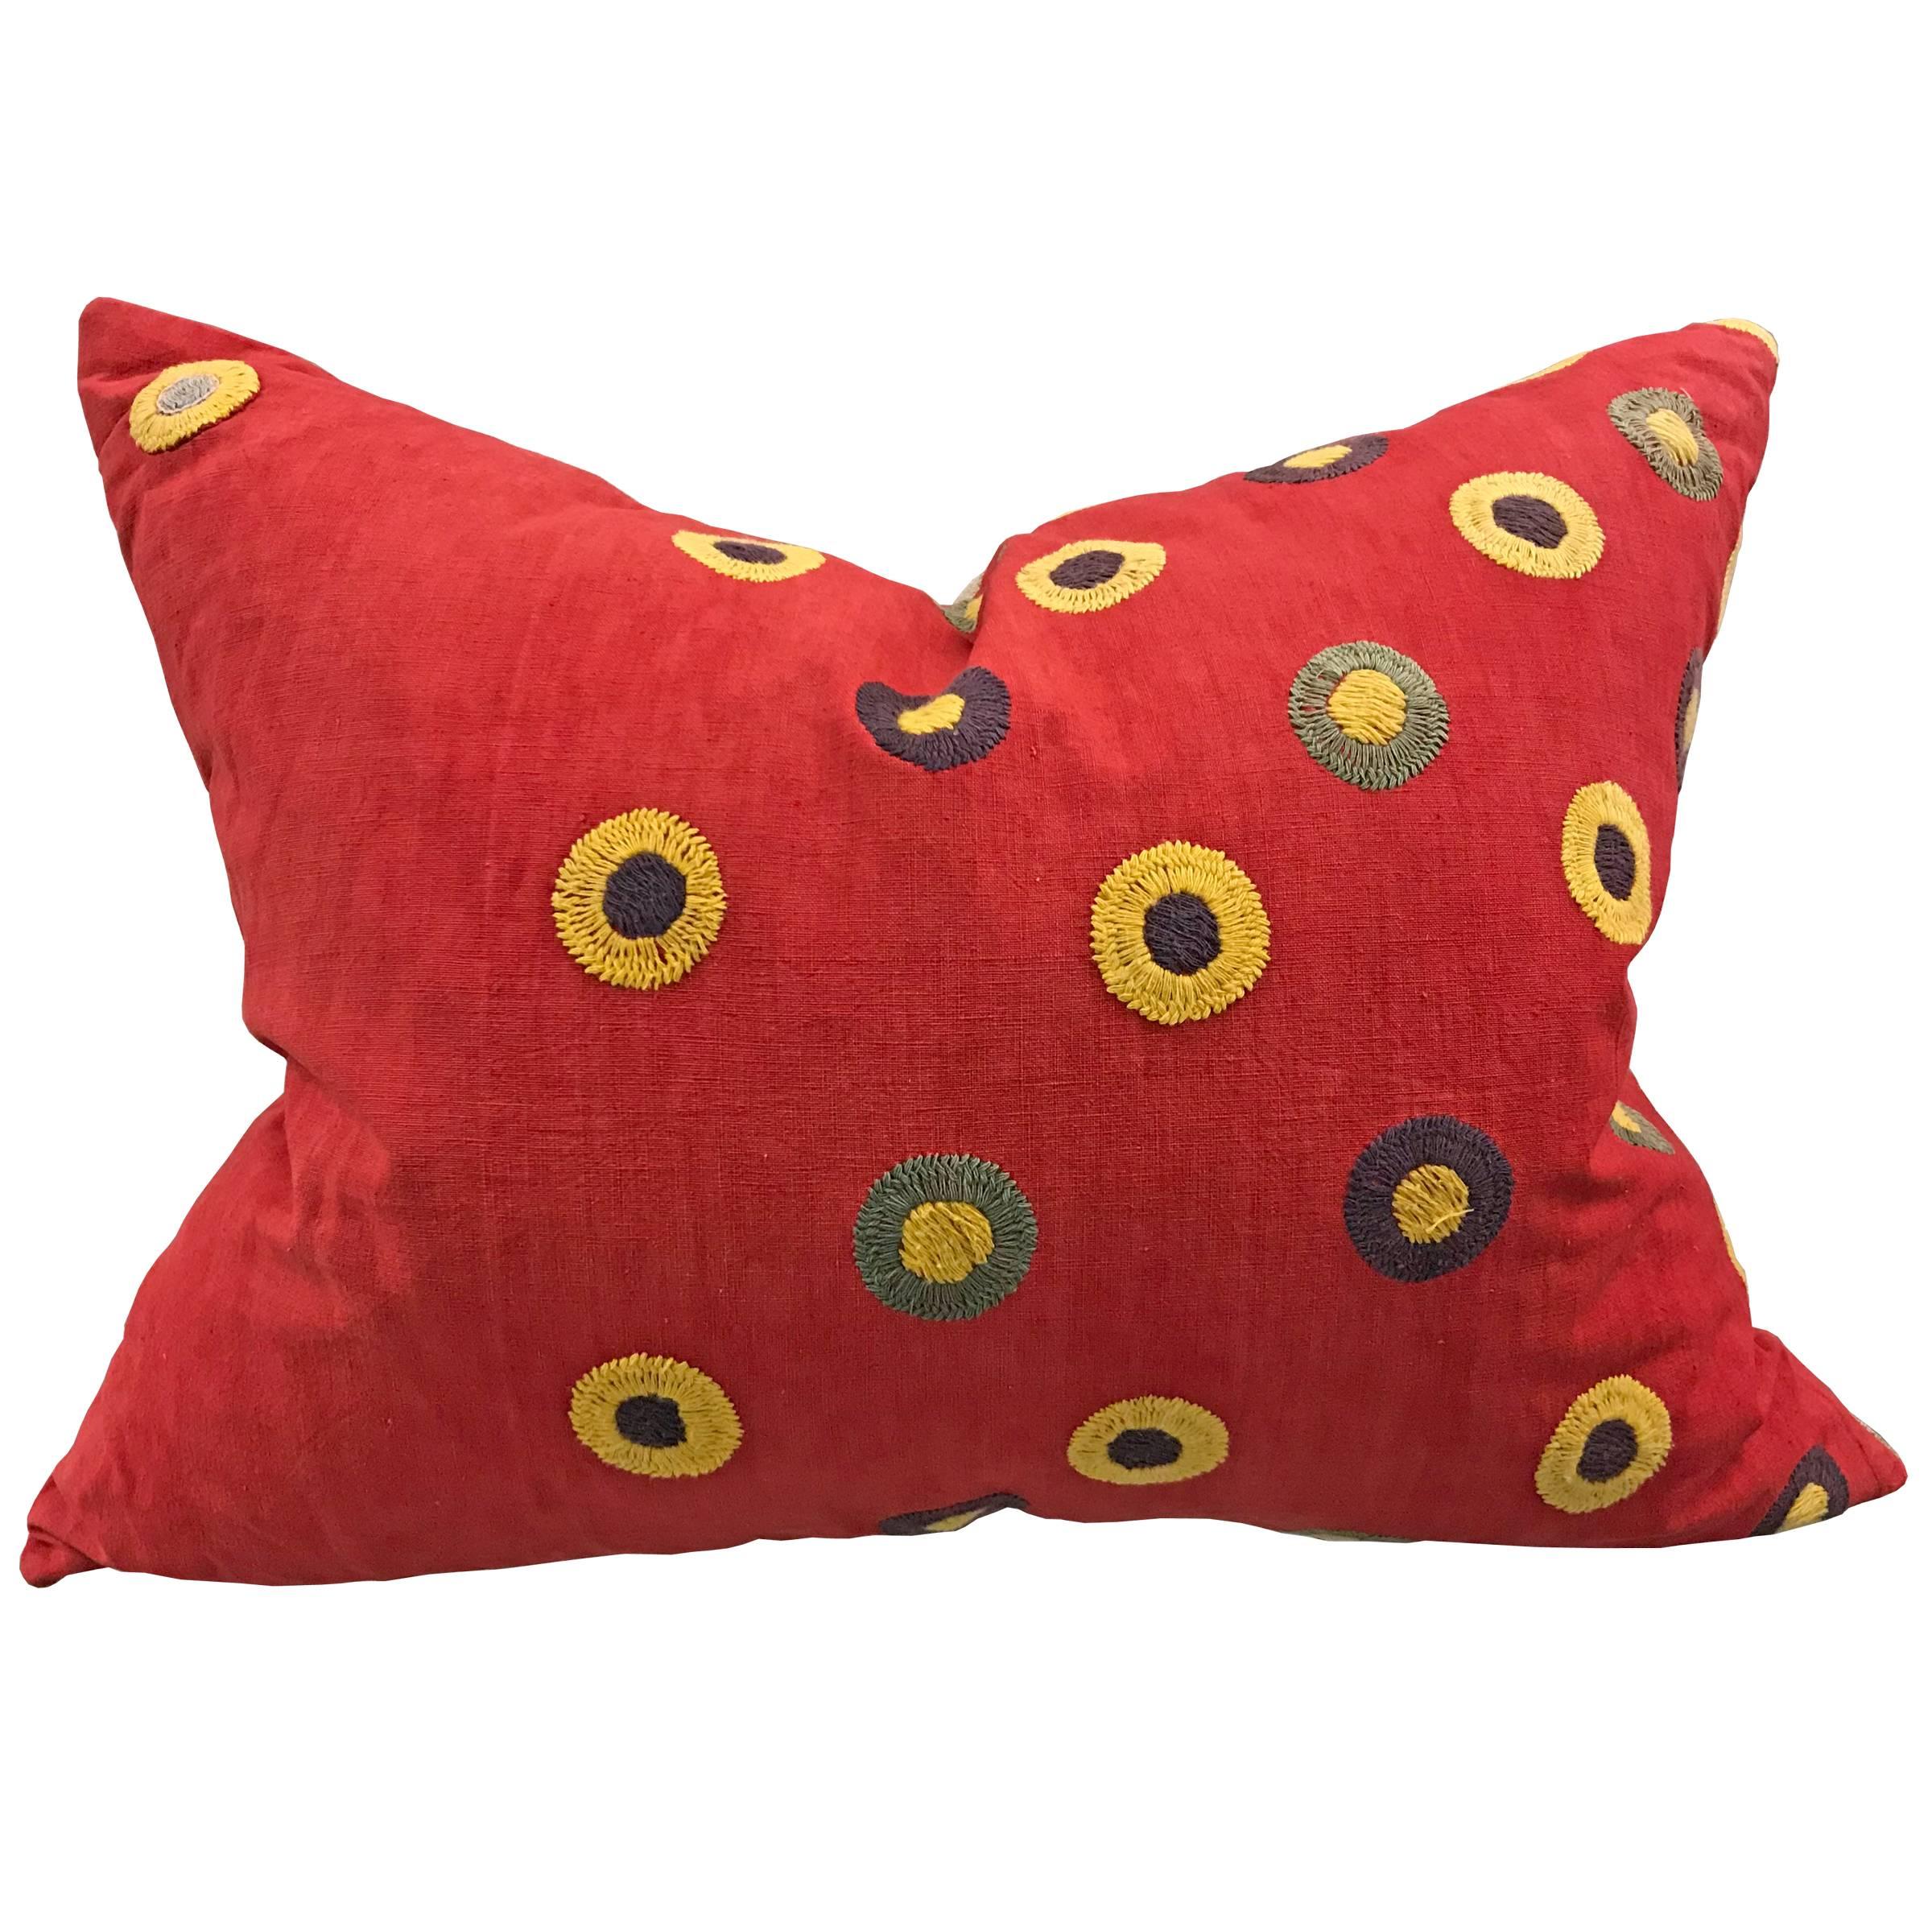 A wonderfully whimsical pair of vintage Uzbek pillows with hand-embroidered stylized flowers in an asymmetrical pattern on a beautiful handwoven red cotton ground. The backs are antique Italian linen. Filled with down.